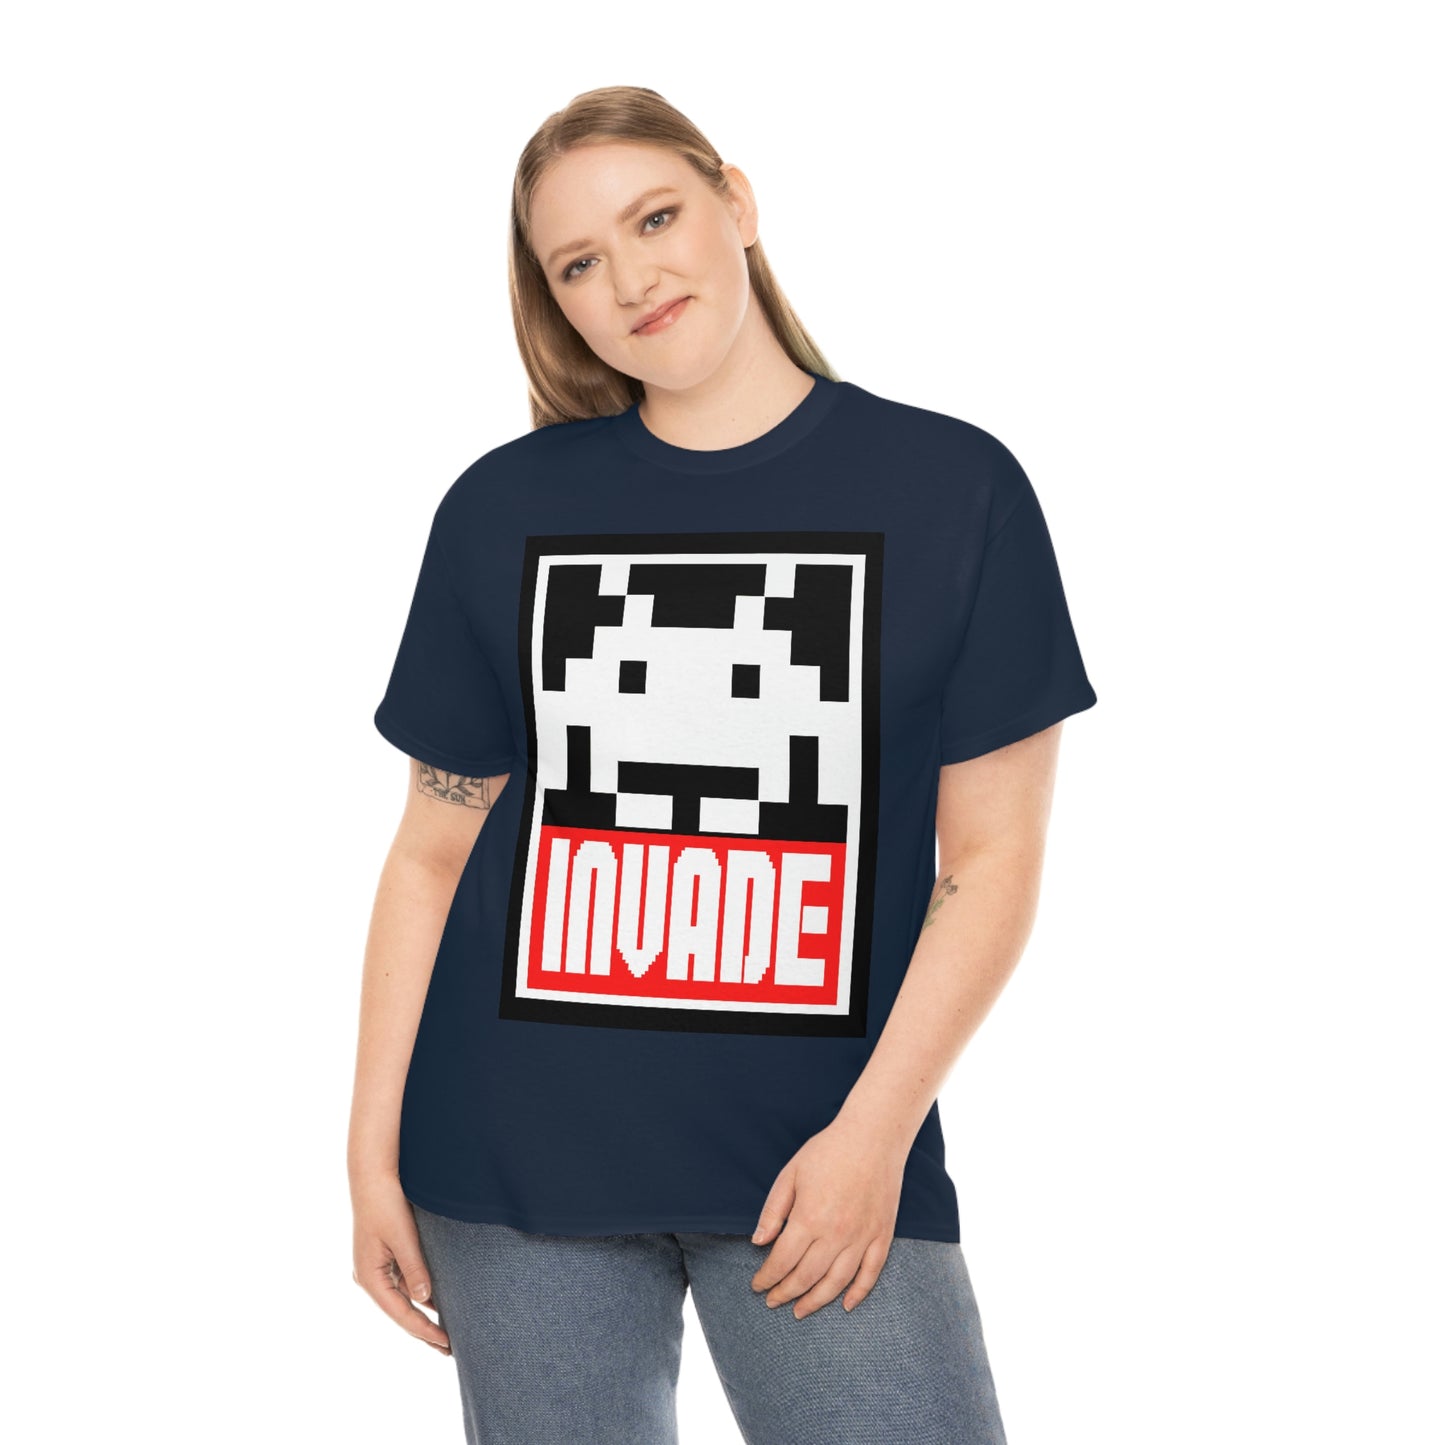 Space Invaders Men's Tee - Obey and Invade